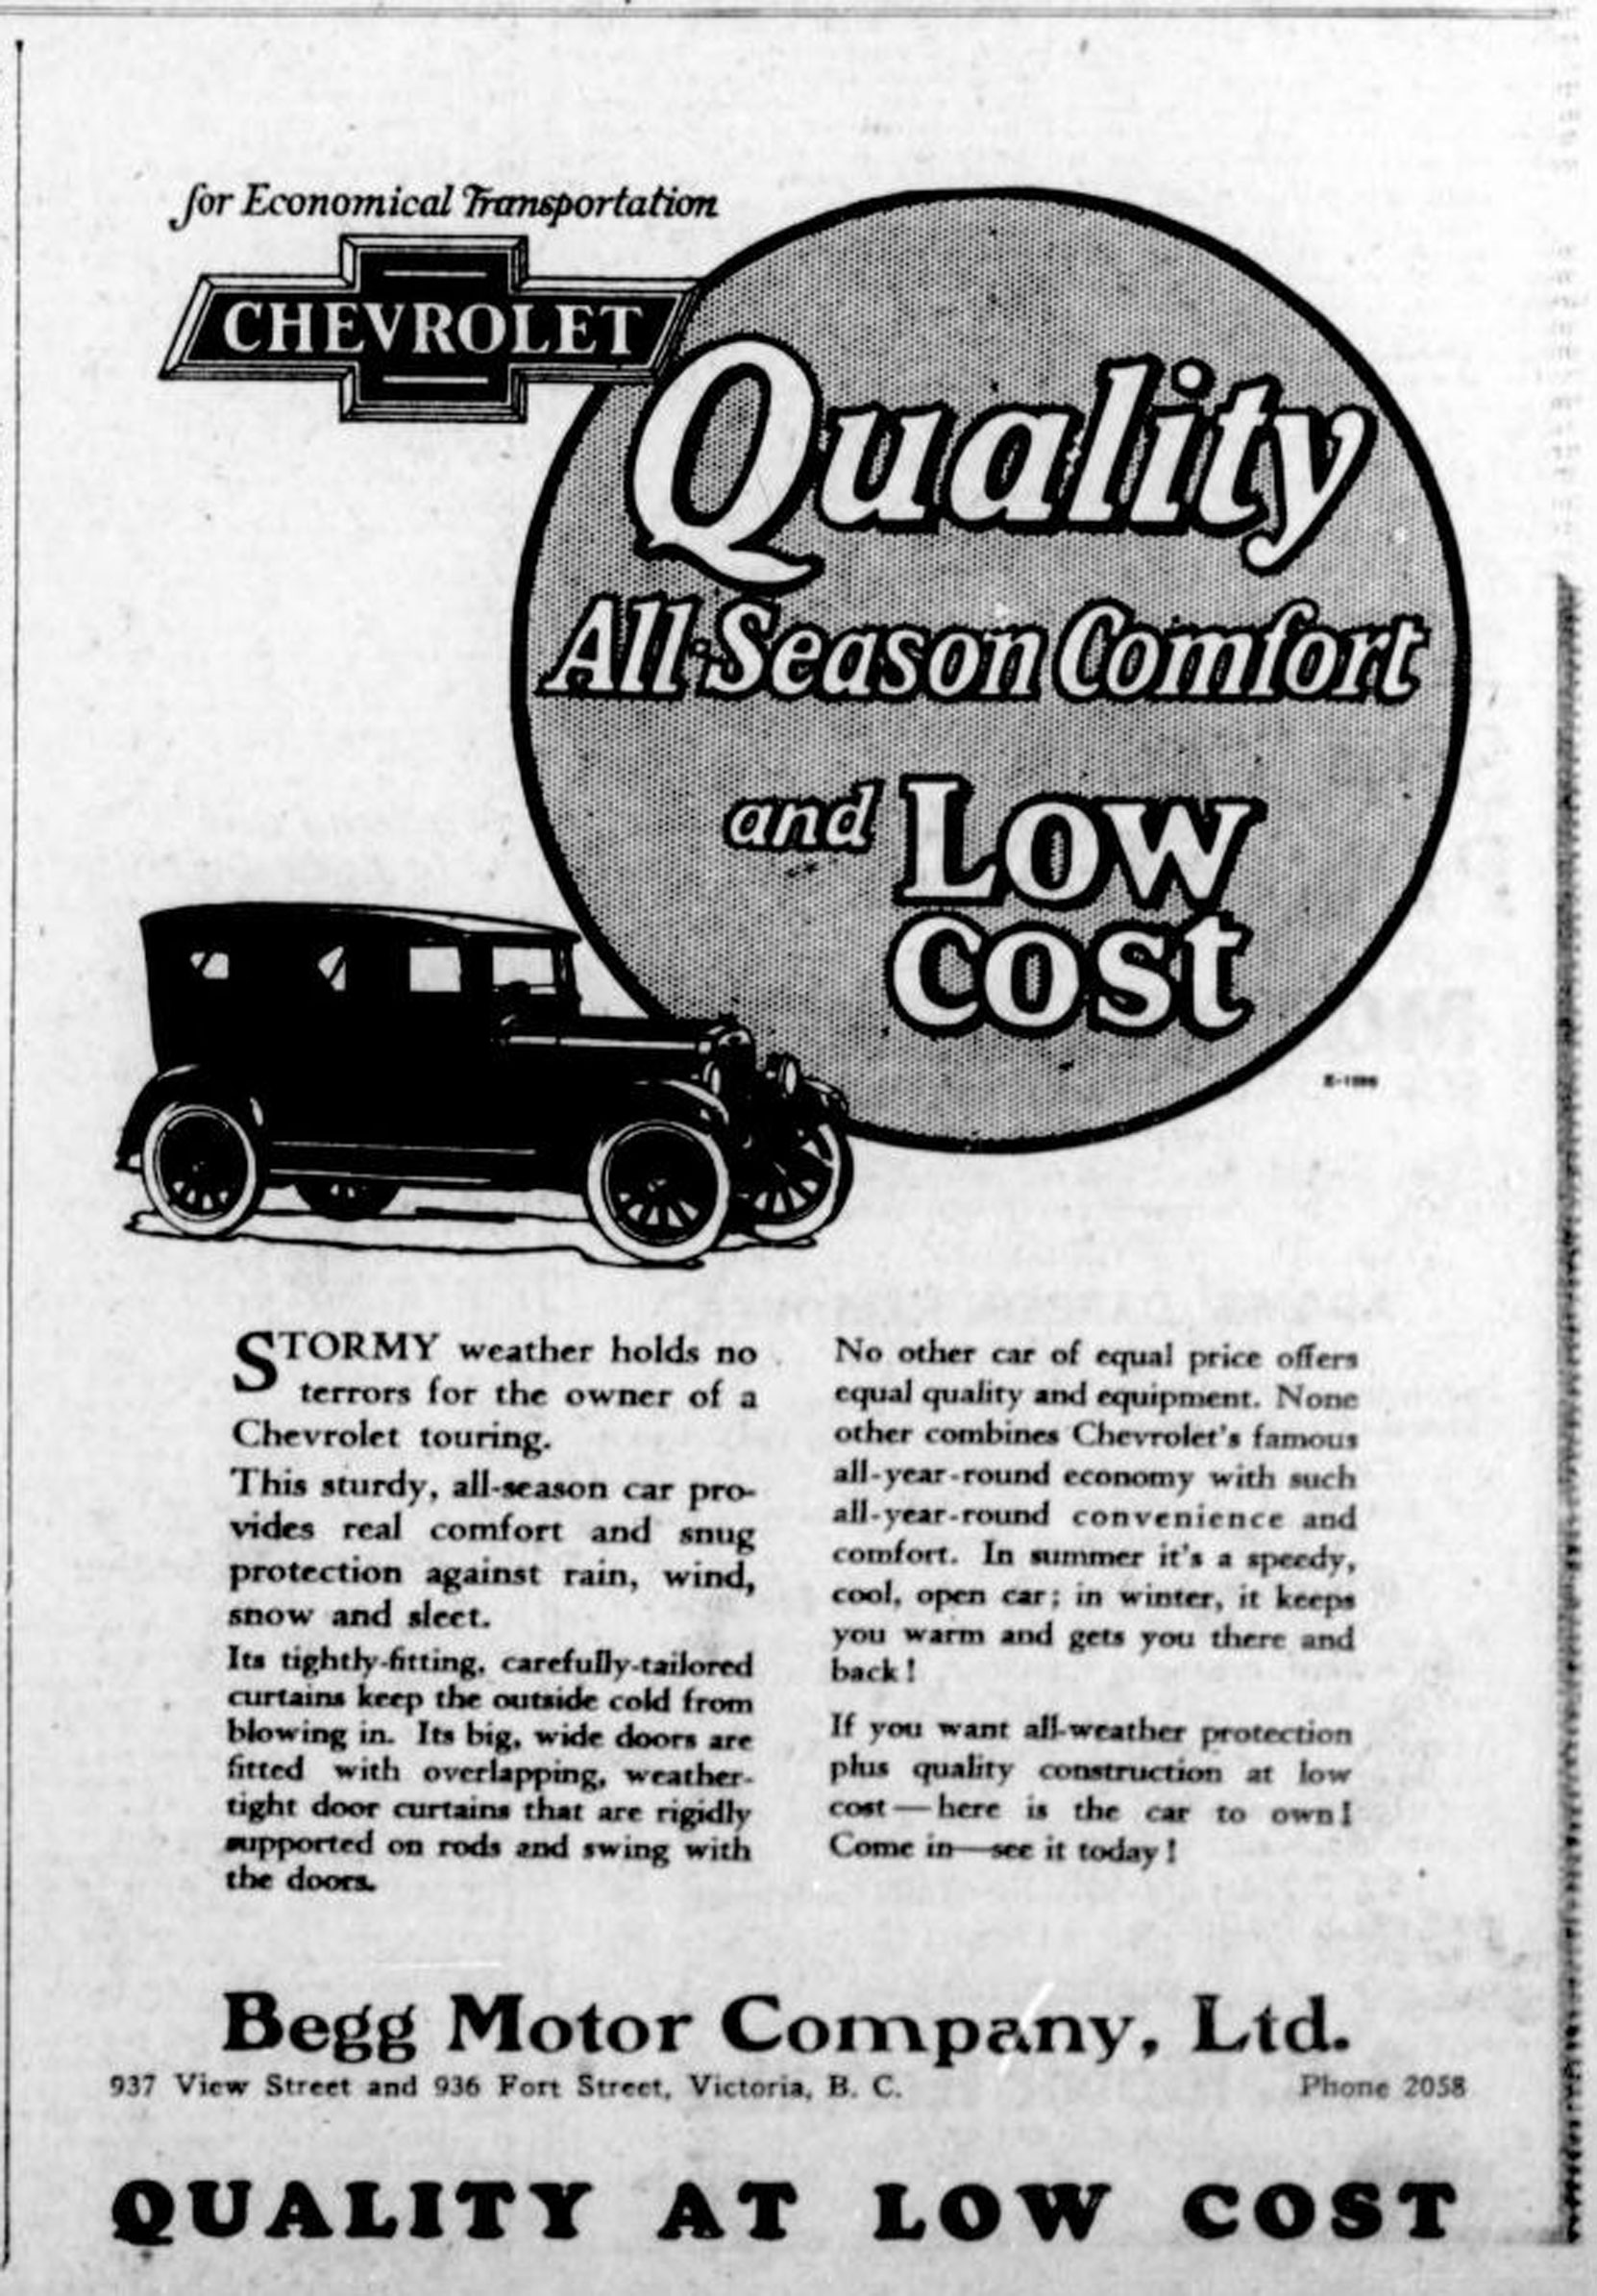 1926 advertisement for Chevrolet automobiles, placed by Begg Motor Company, 937 View Street. This advertisement was placed in the spring of 1926, before Begg Motor Co. opened its new building at 1250 Quadra Street. (Victoria Online Sightseeing Tours collection)